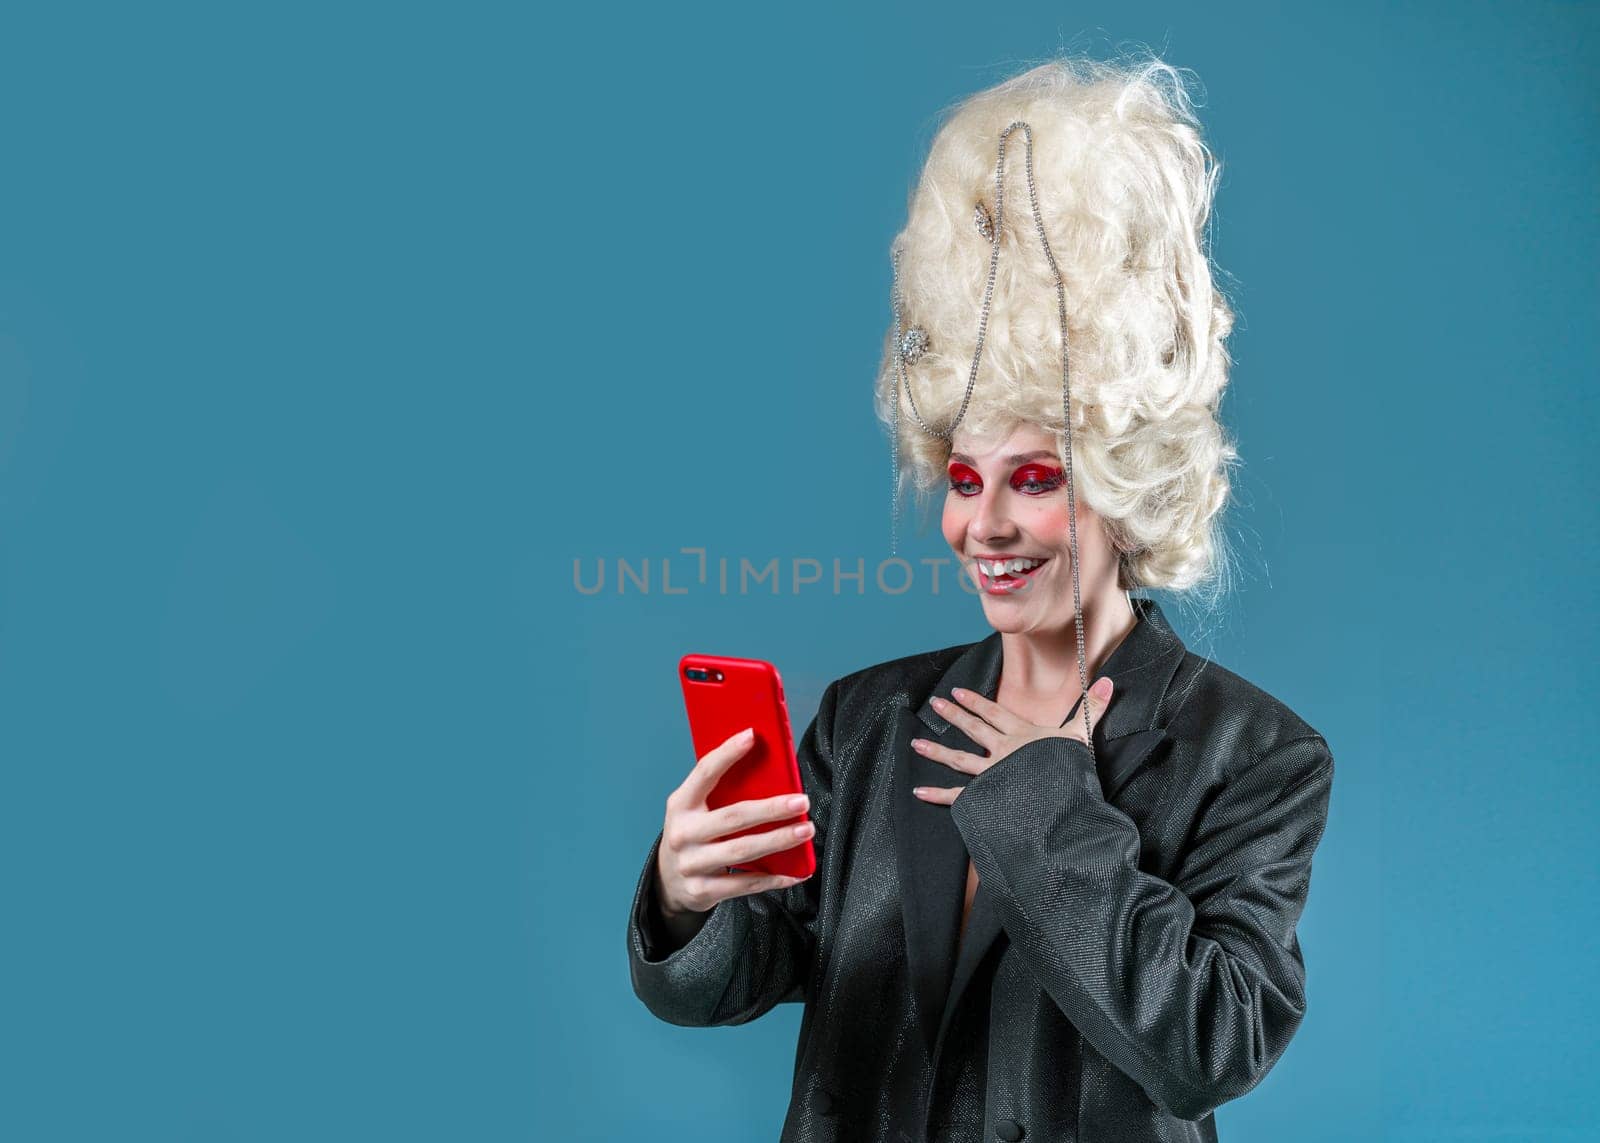 Cheerful young woman in red makeup and royal vintage wig using smartphone. Amazed funny princess wearing black jacket looking at screen of cellphone. Happy lady standing on blue background.